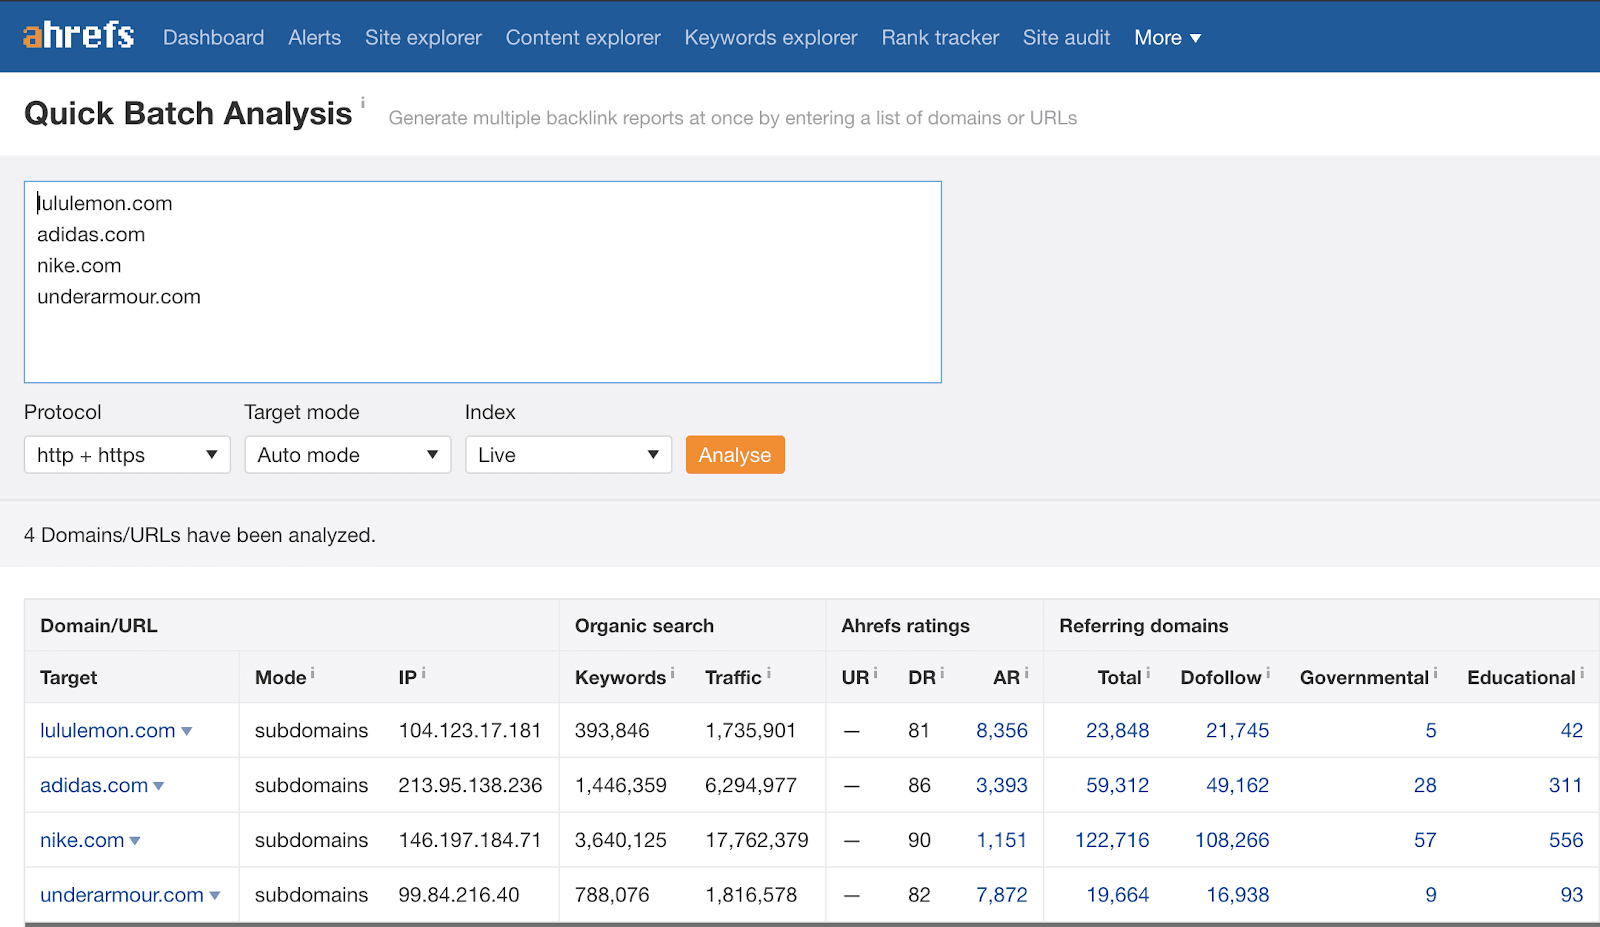 Reference Mass Analysis at Ahrefs